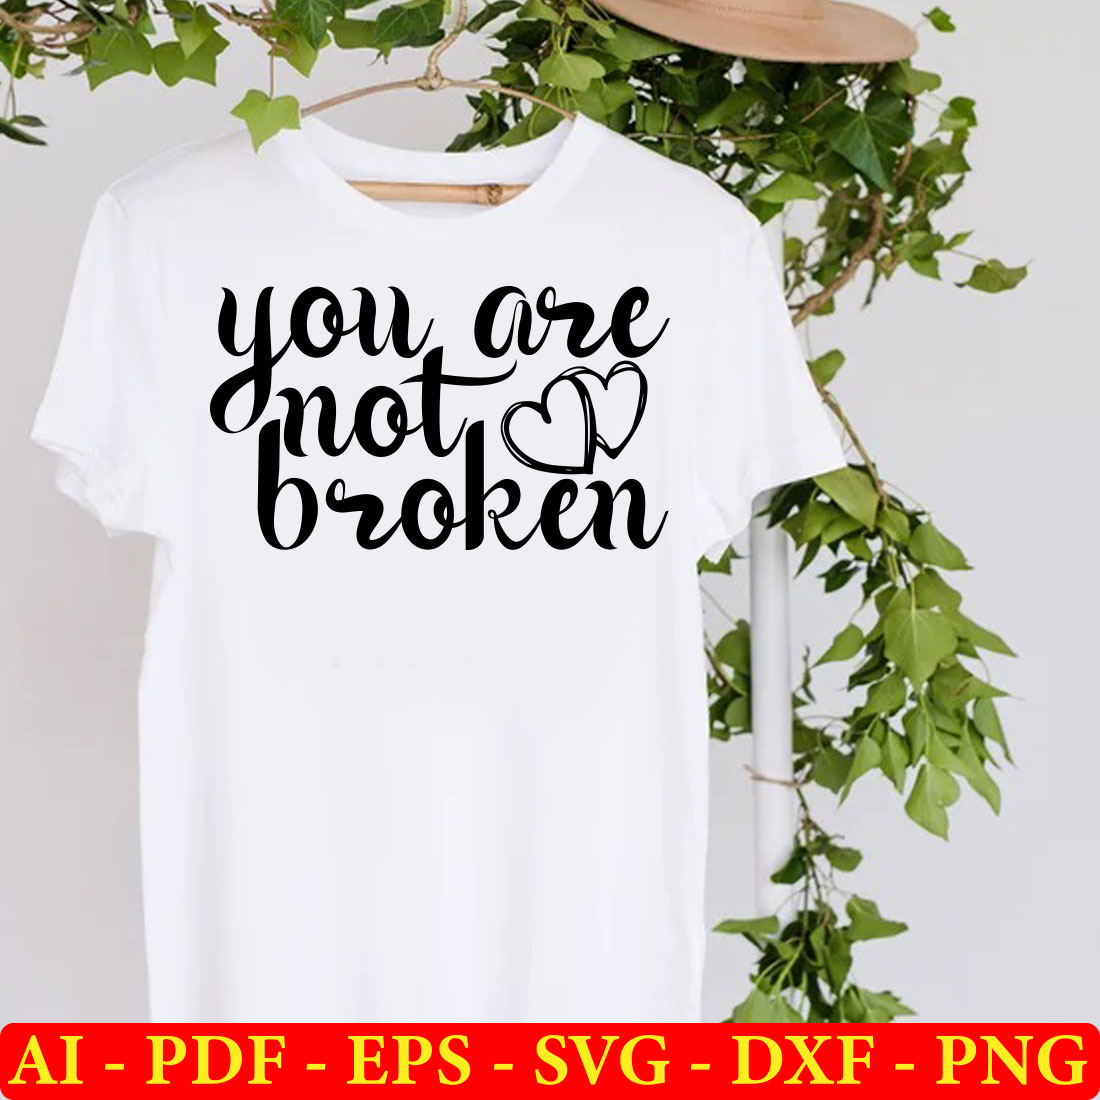 T - shirt that says you are not broken.